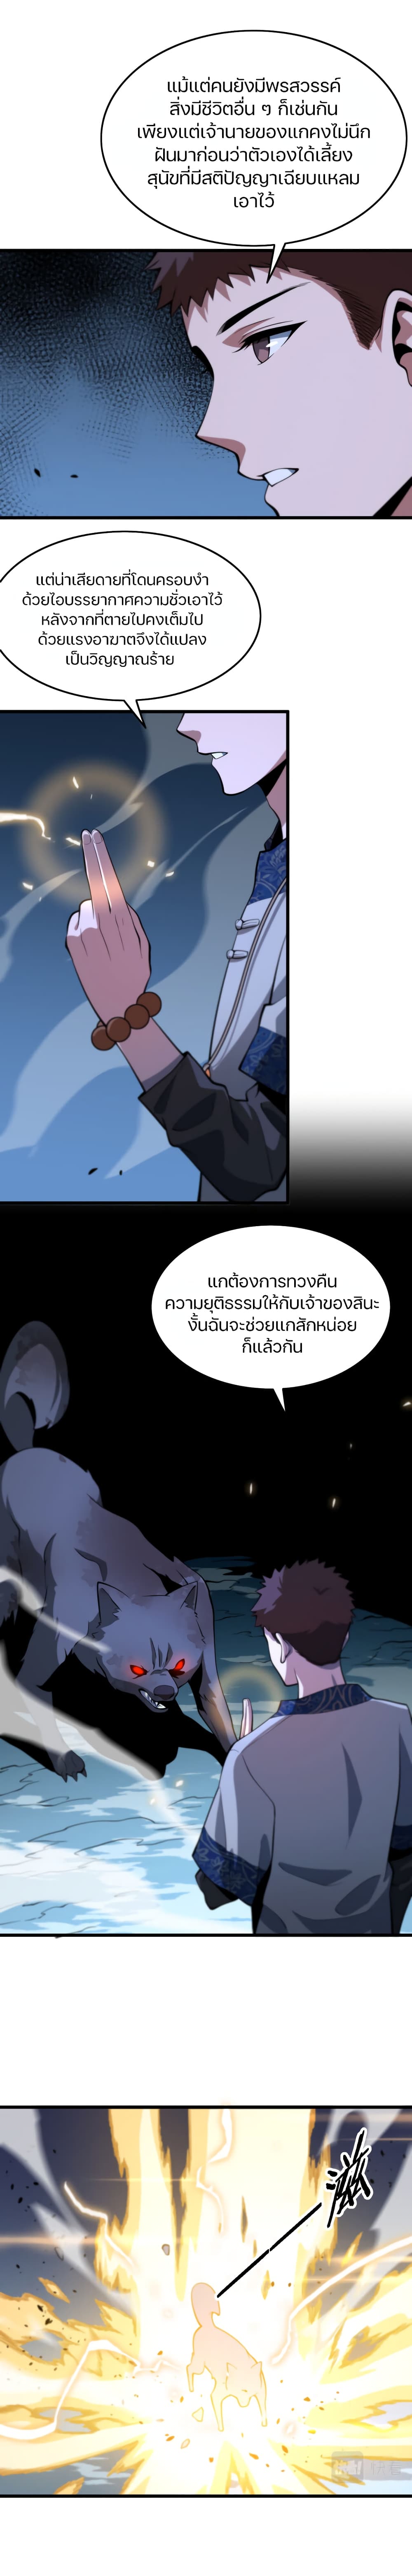 The Grand Master came down from the Mountain 51-สุนัขผู้ซื่อสัตย์